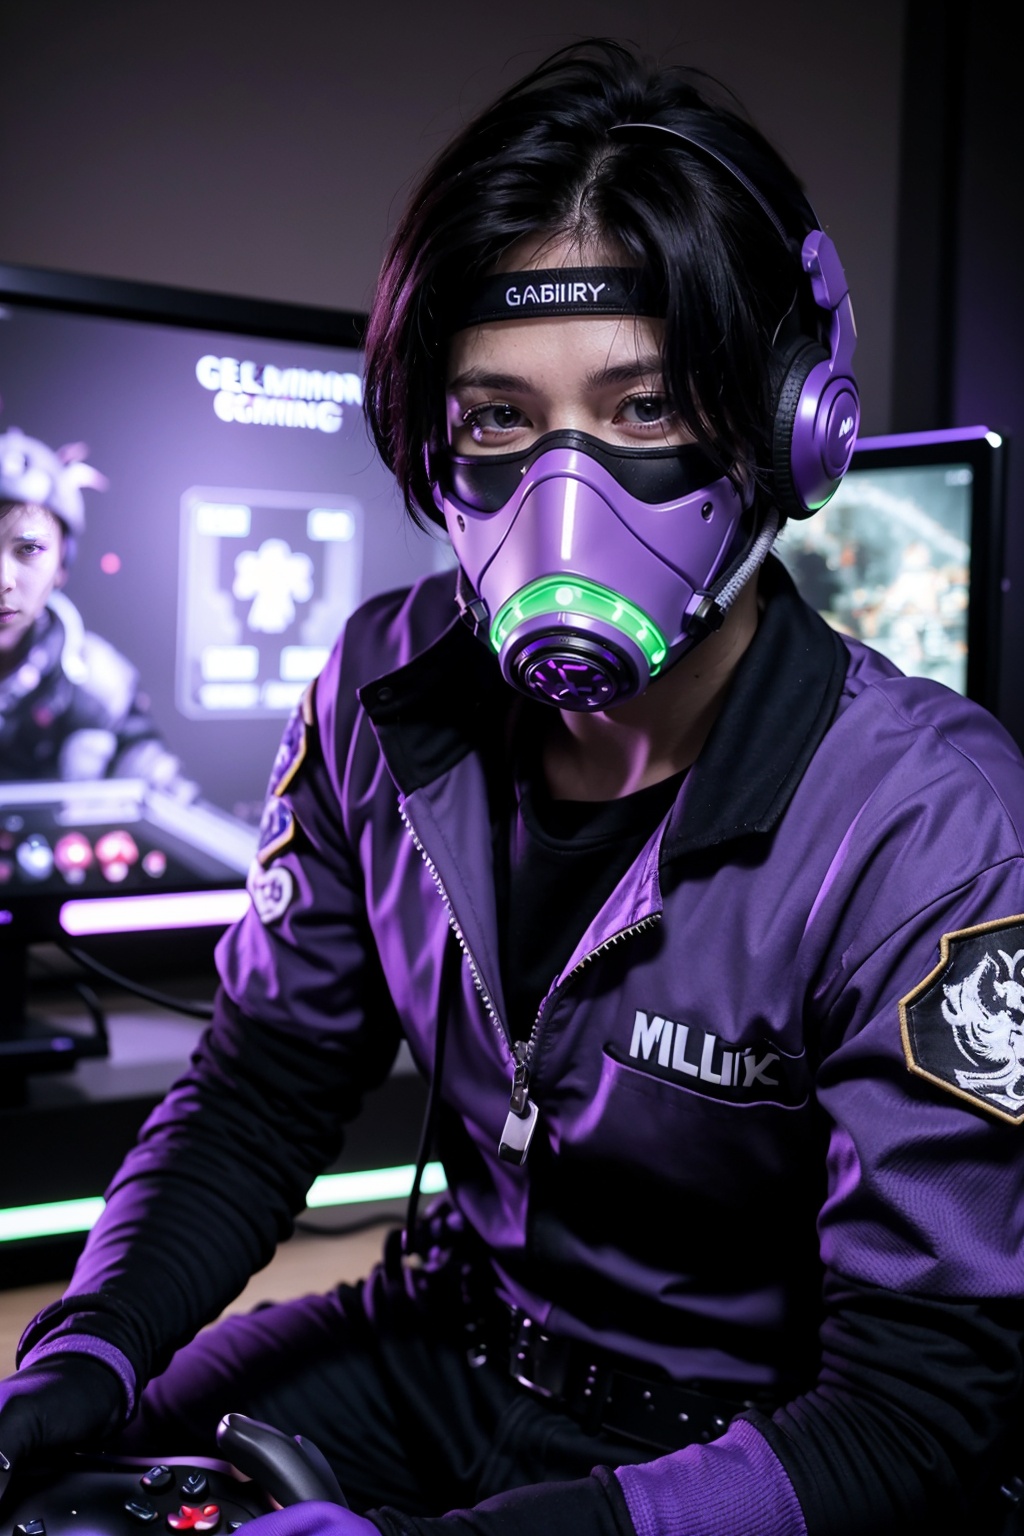  Photo of 1boy, young and handsome, extreme detailed,
combat suits, gloves, belt, respirator,
looking at viewer, face, portrait, close-up, purple,
(tactical outfit), (solo character), (gaming theme:1.5),
purple, (black short hair), (milittary gear), (gas mask:0.4), (poisonous purple:1.2), (glowing effects, Luminous purple:1.25),  1boy